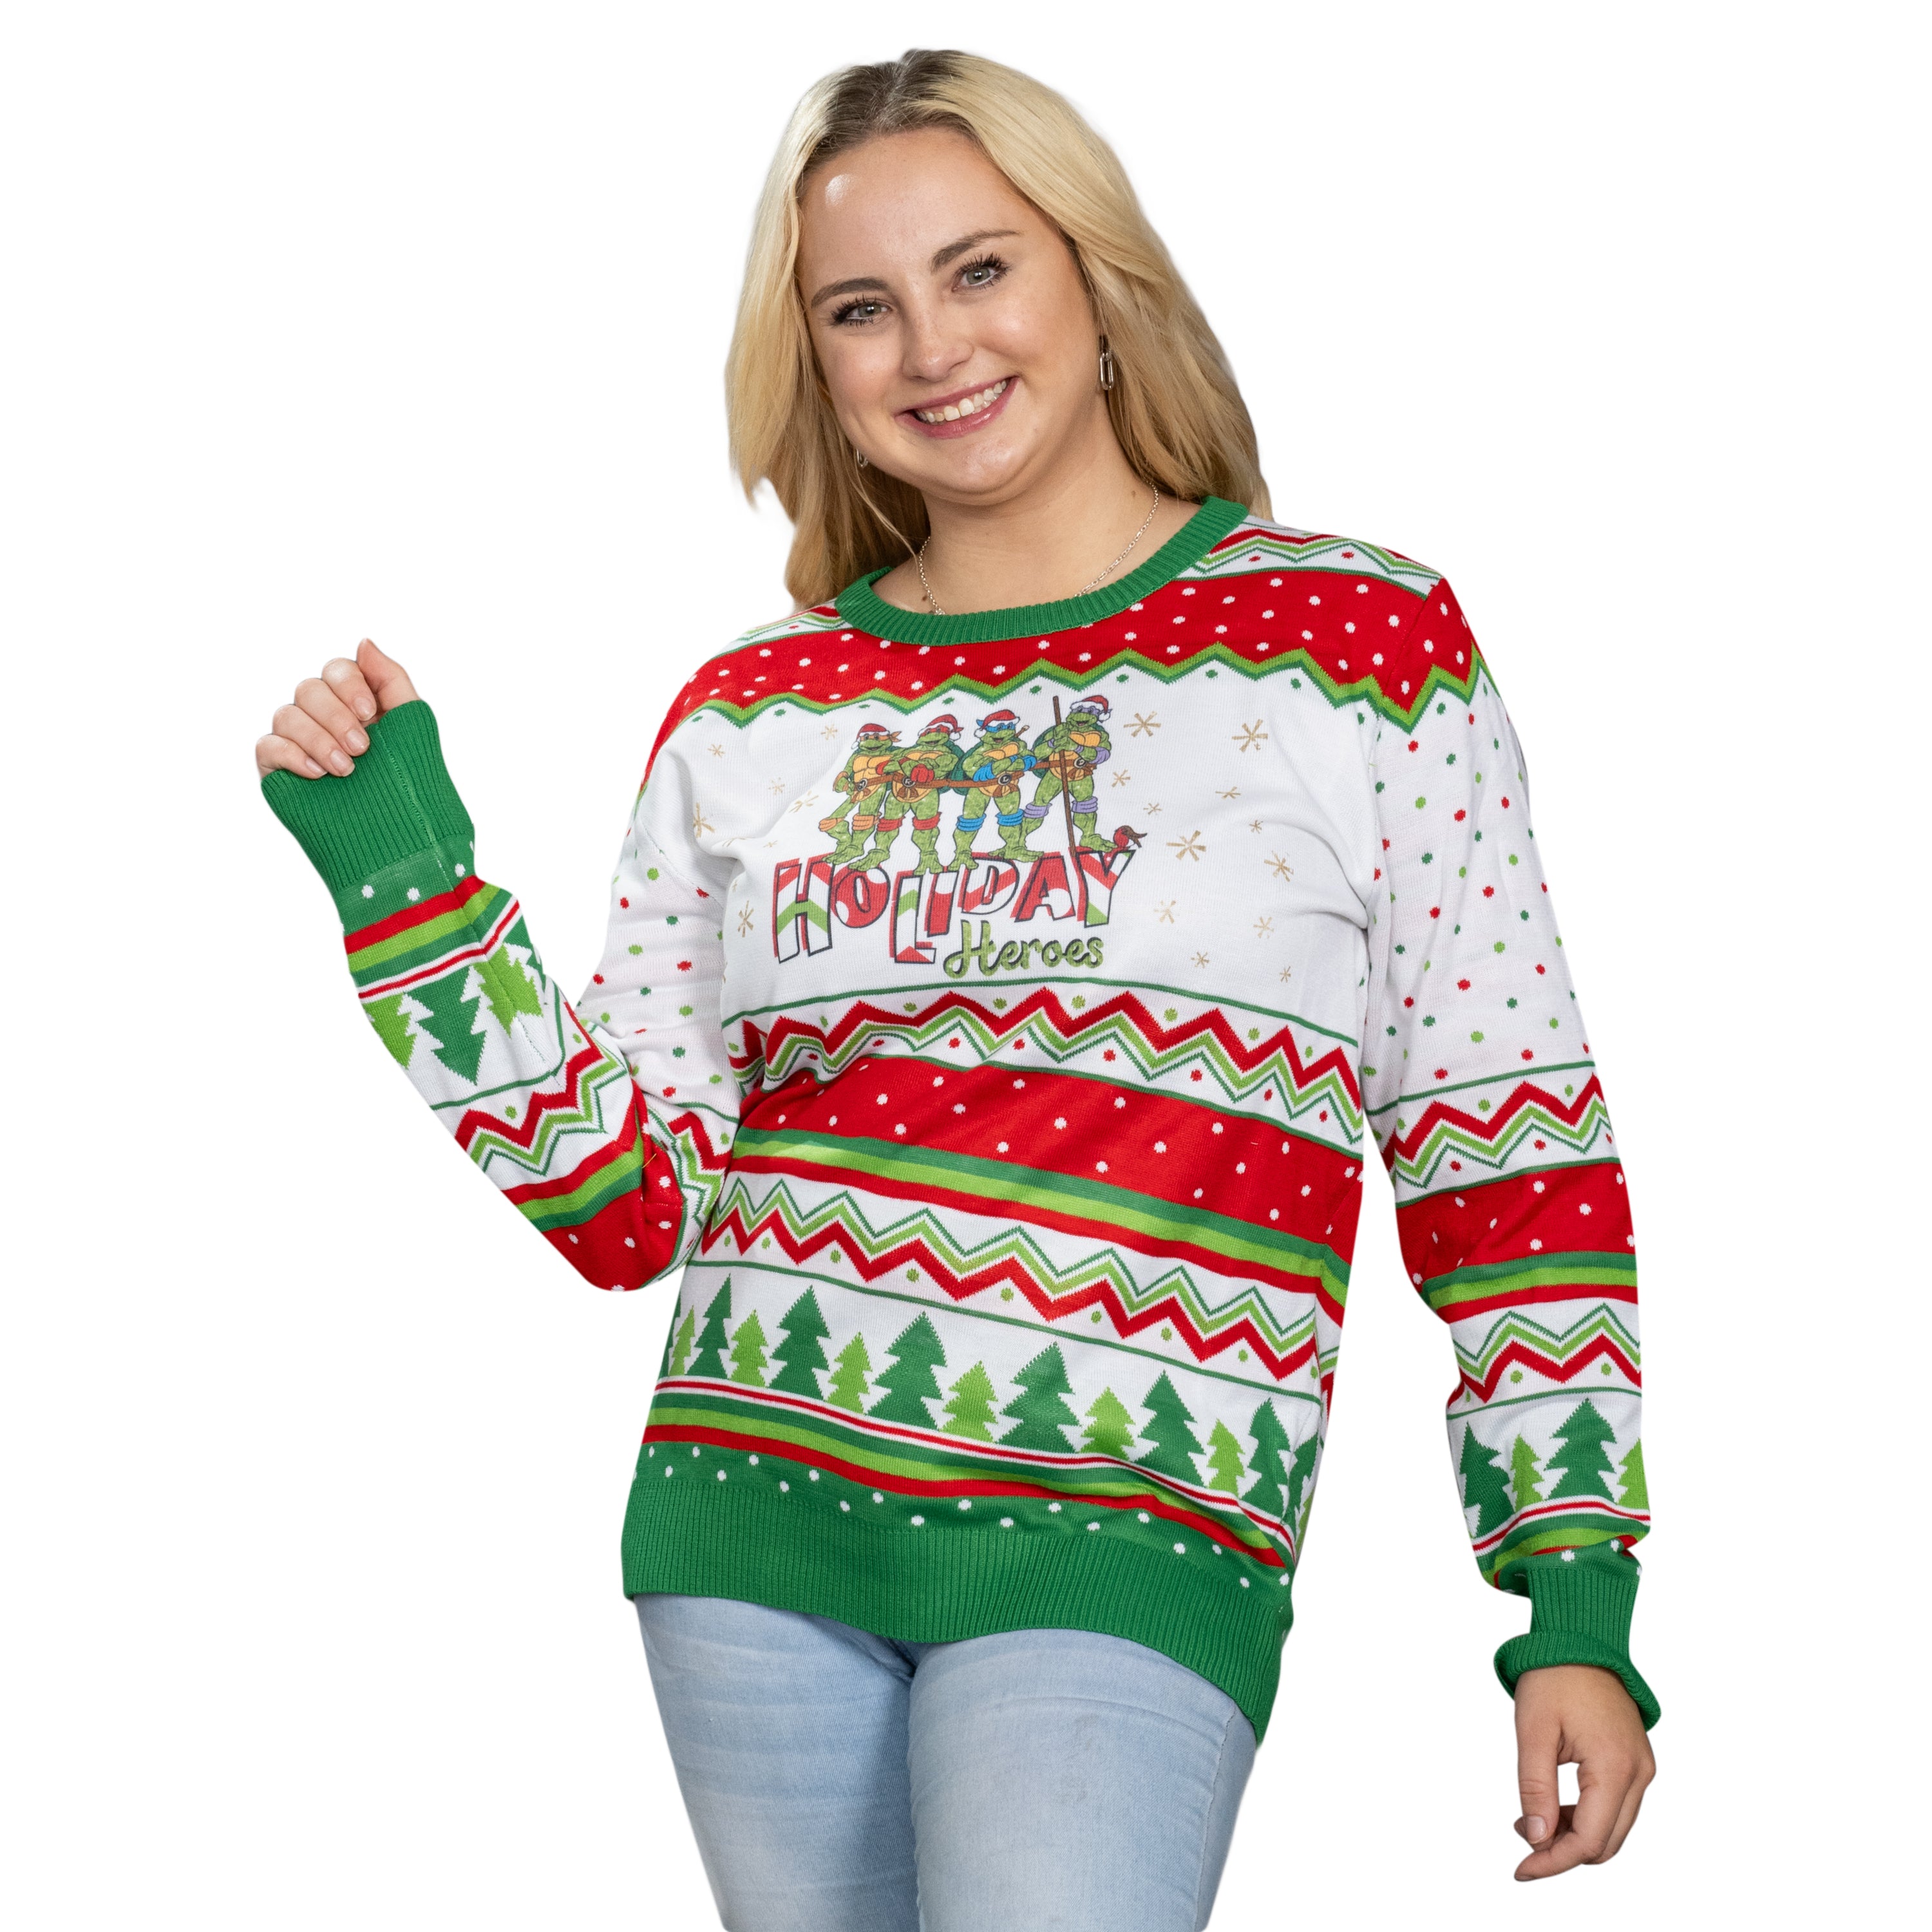 TMNT "Holiday Heroes" Christmas Sweater